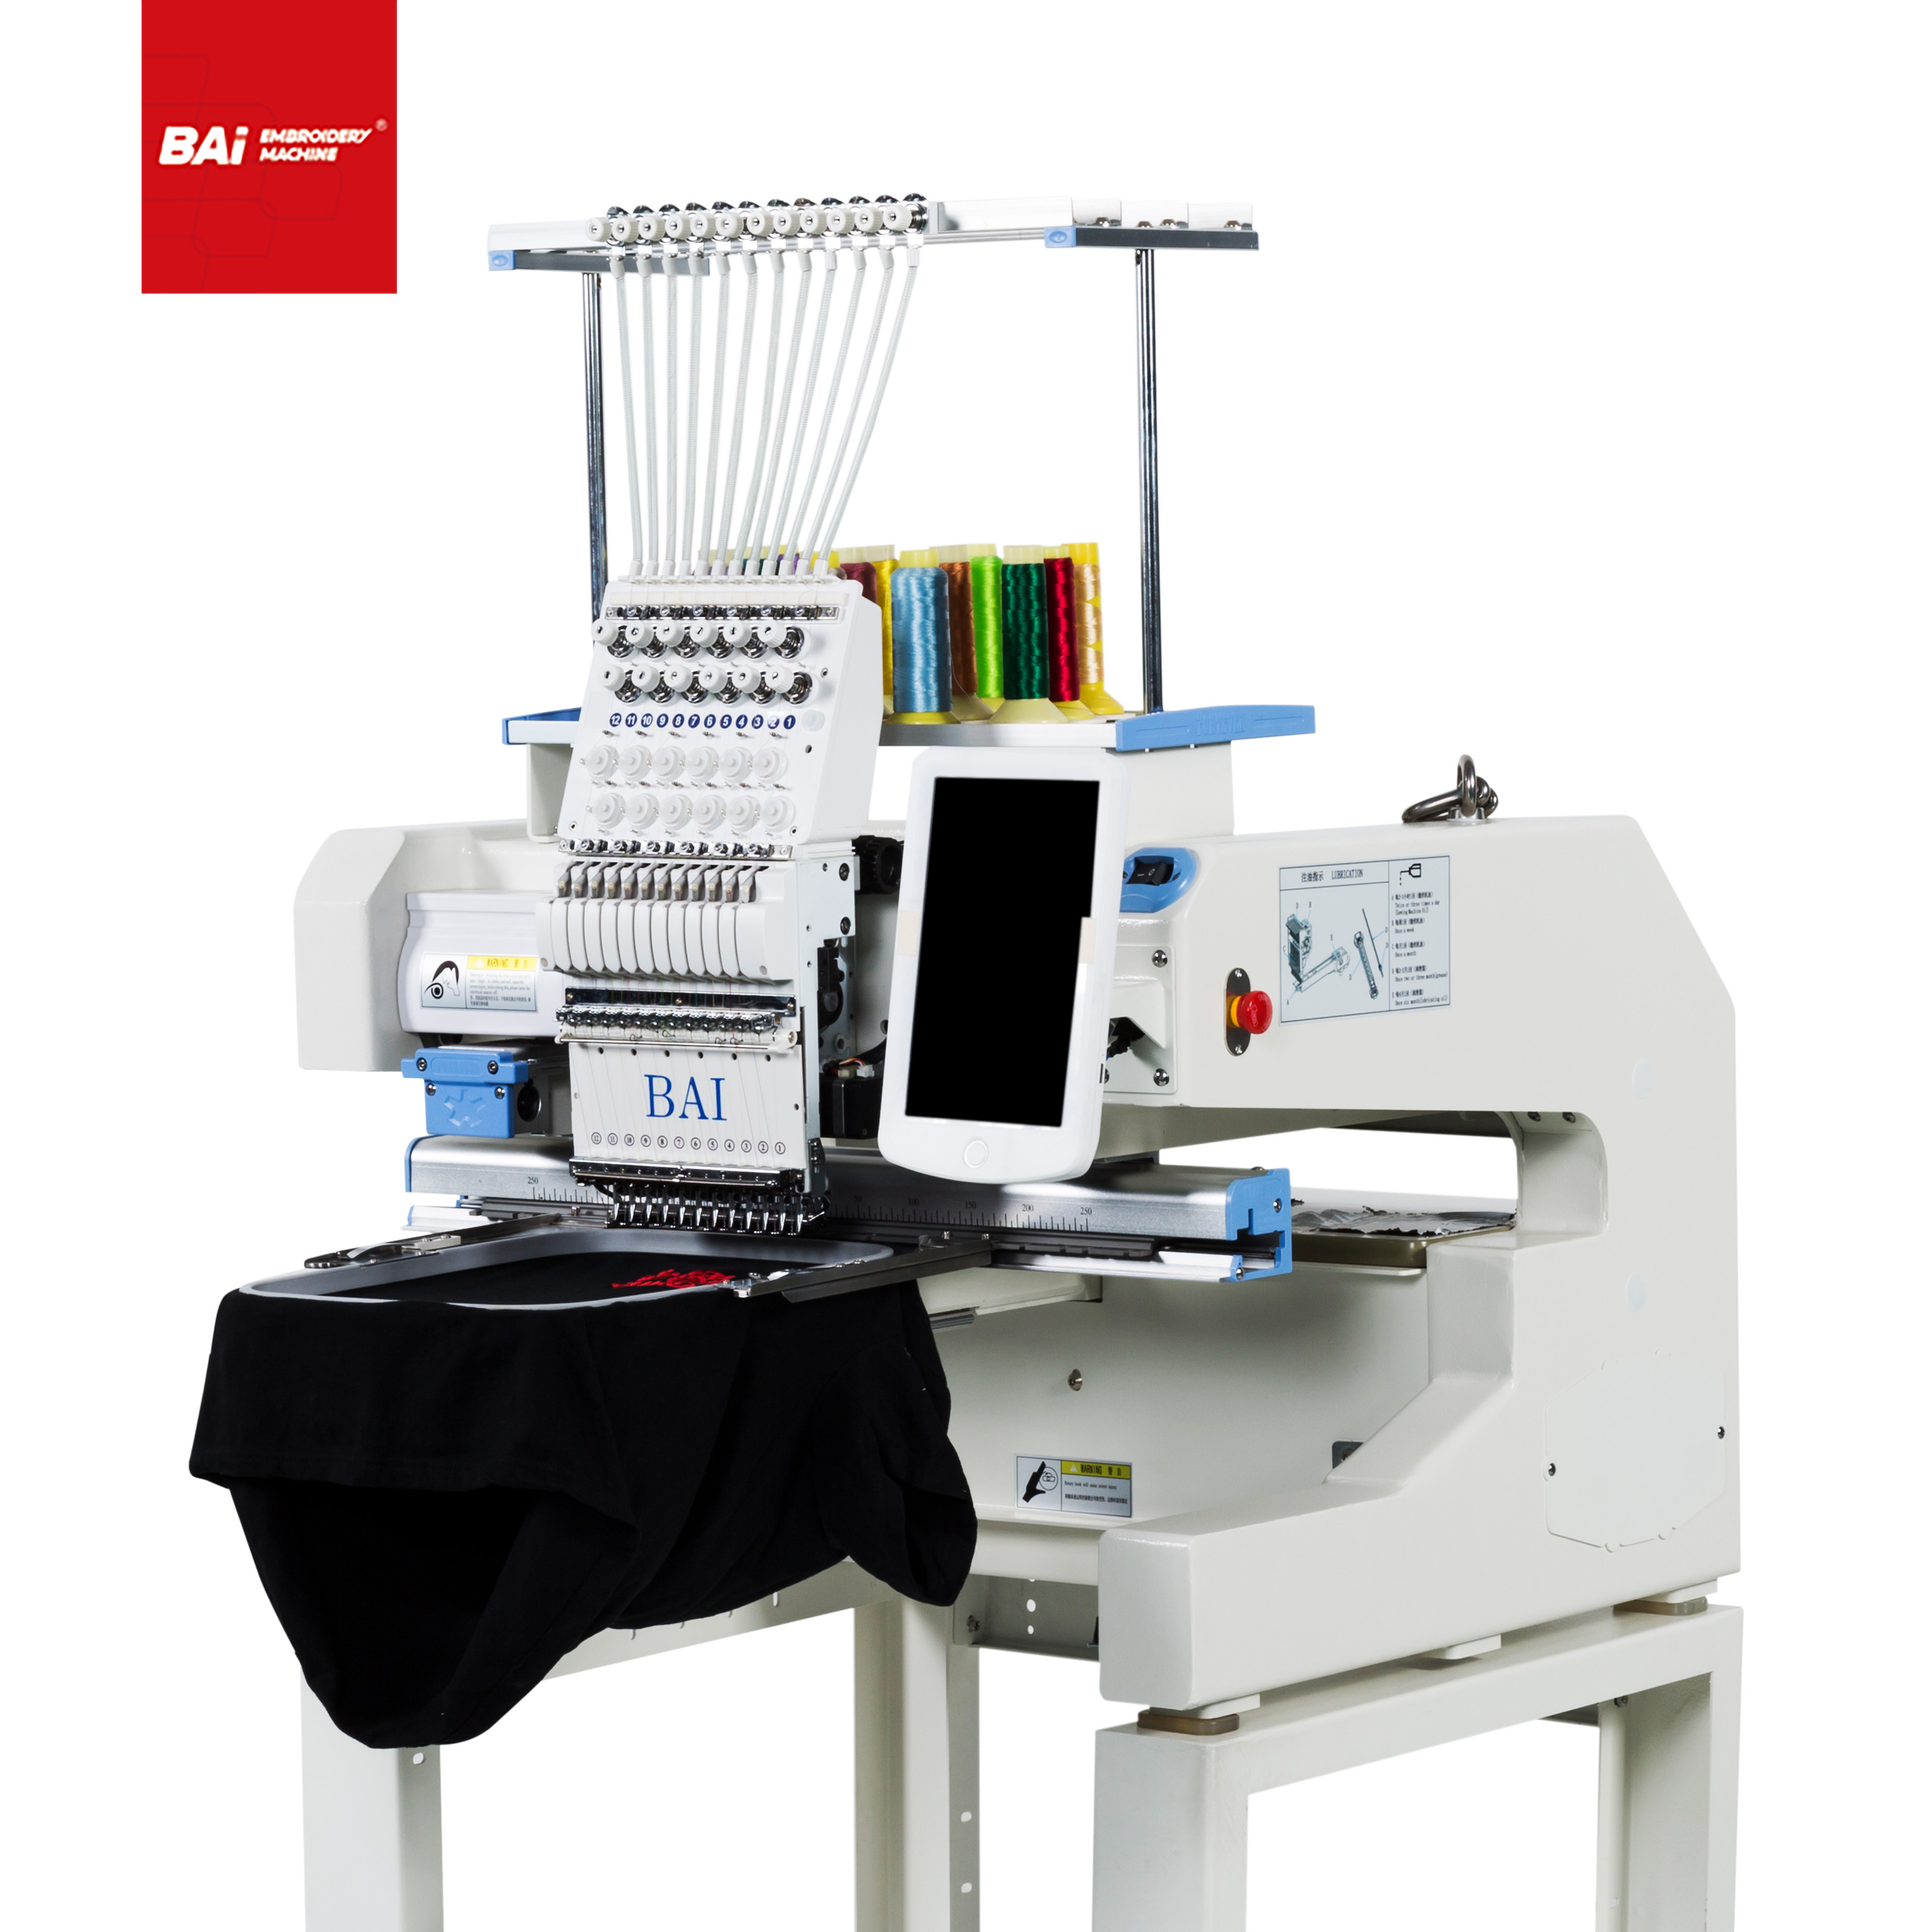 BAI 15 Needles Cap Flat Embroidery Machine for Garment Embroidery